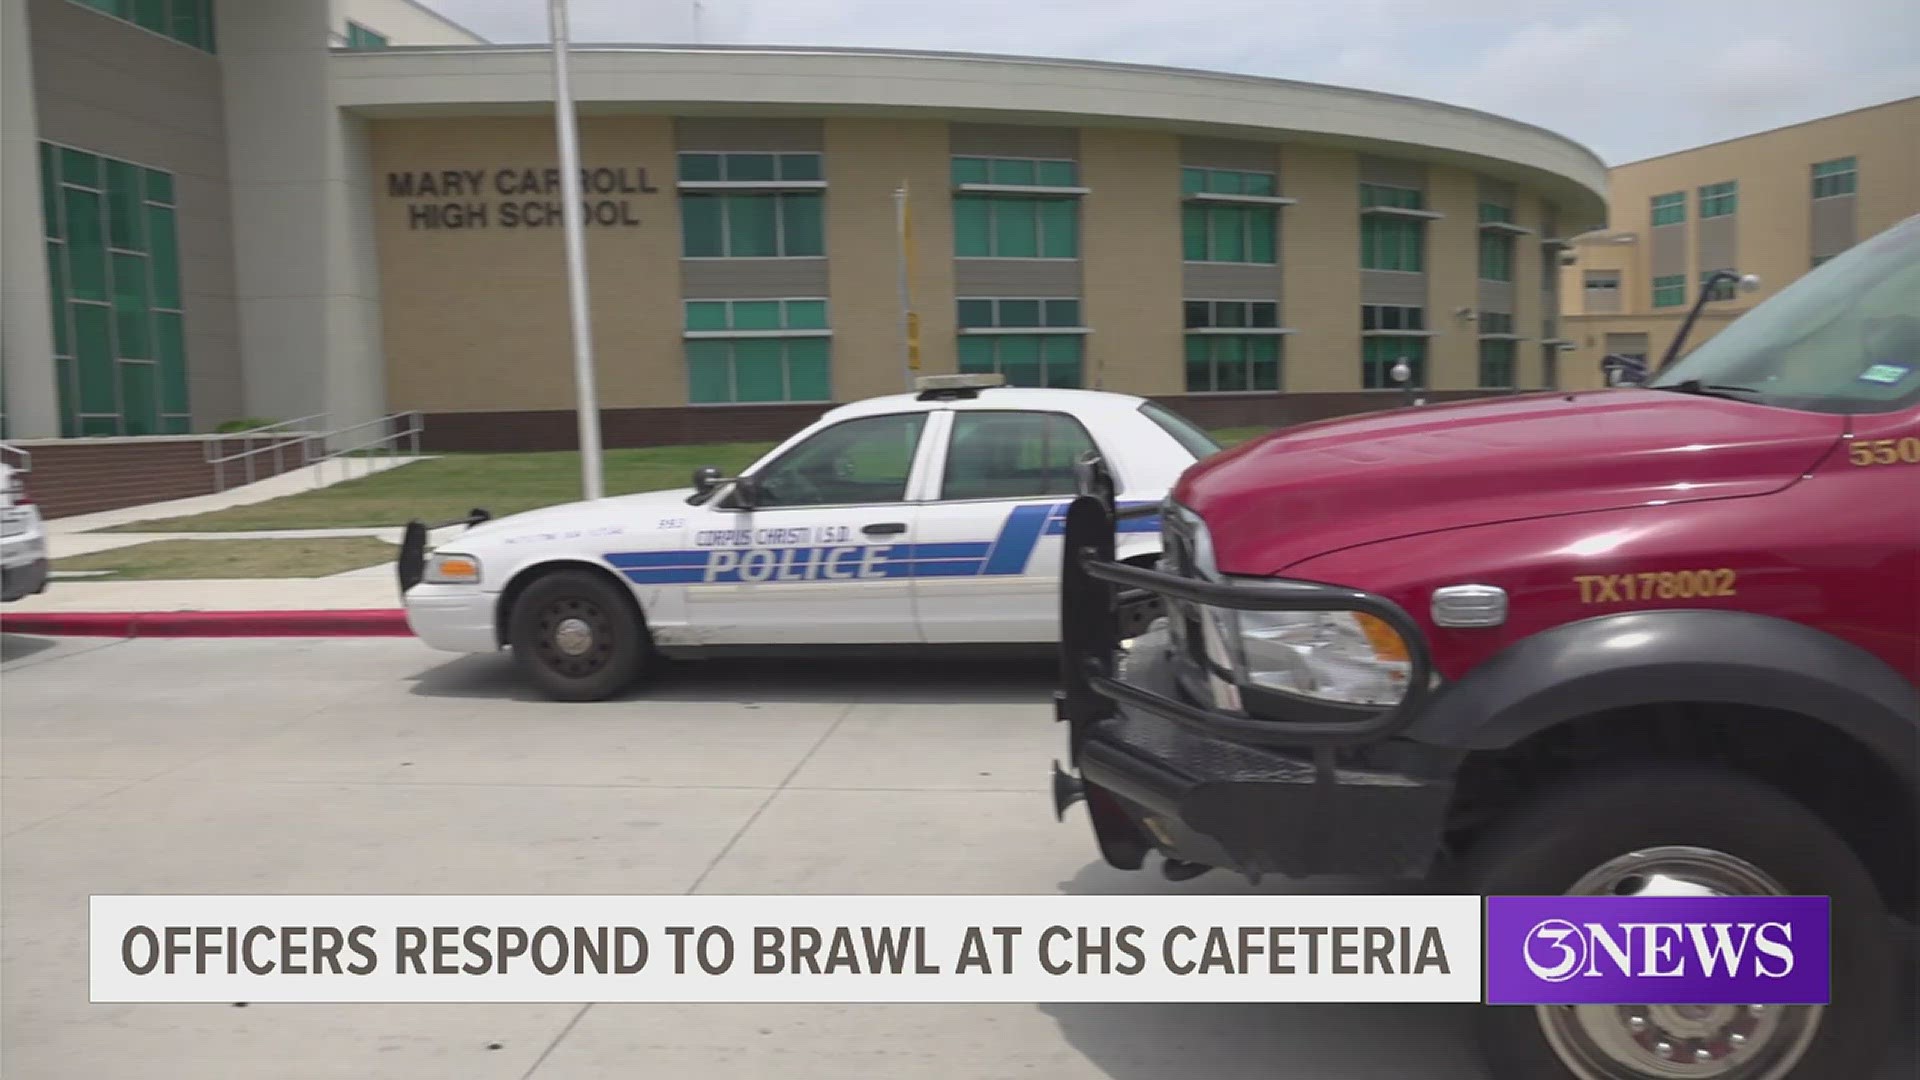 Officers were forced to use pepper spray to try and control the situation, CCISD police chief Kirby Warnke, but no one was taken to the hospital.